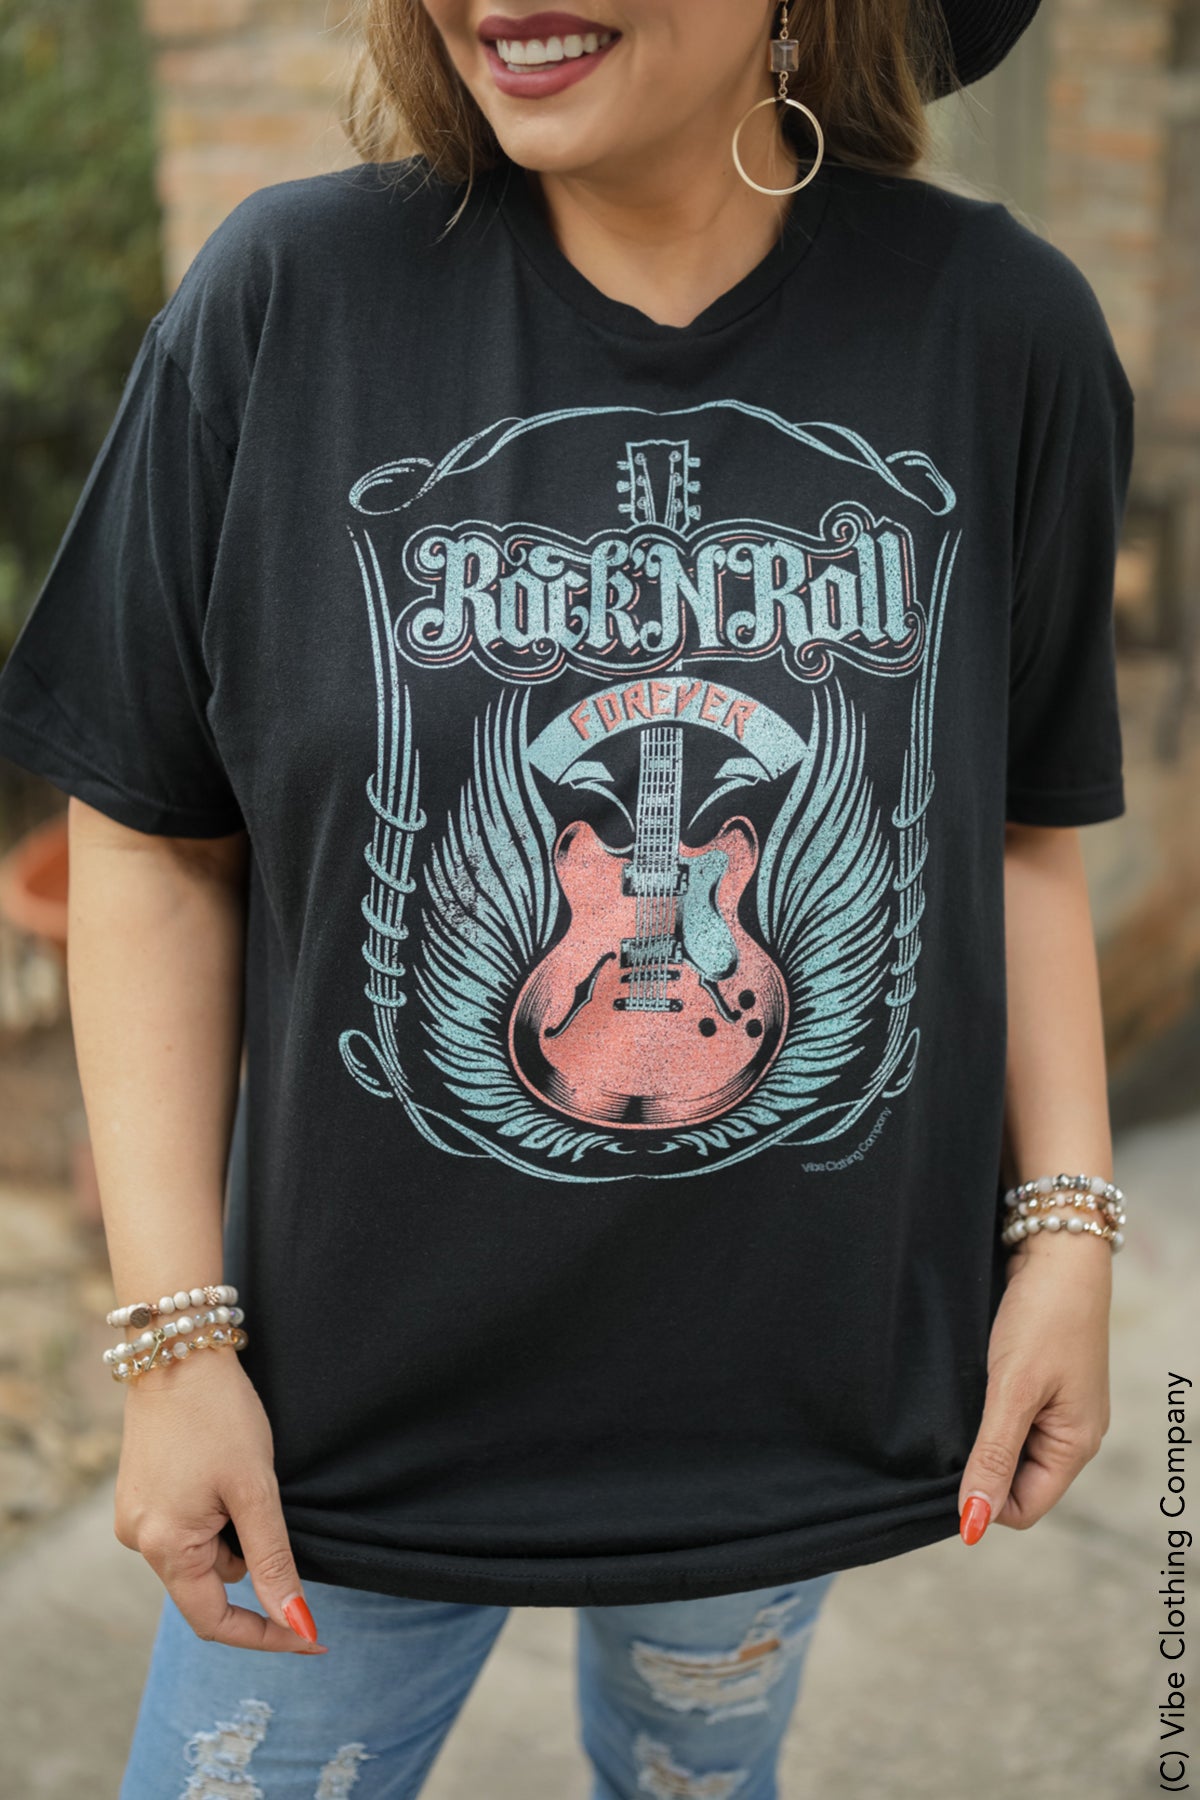 Rock and Roll Forever Graphic Tee graphic tees VCC 